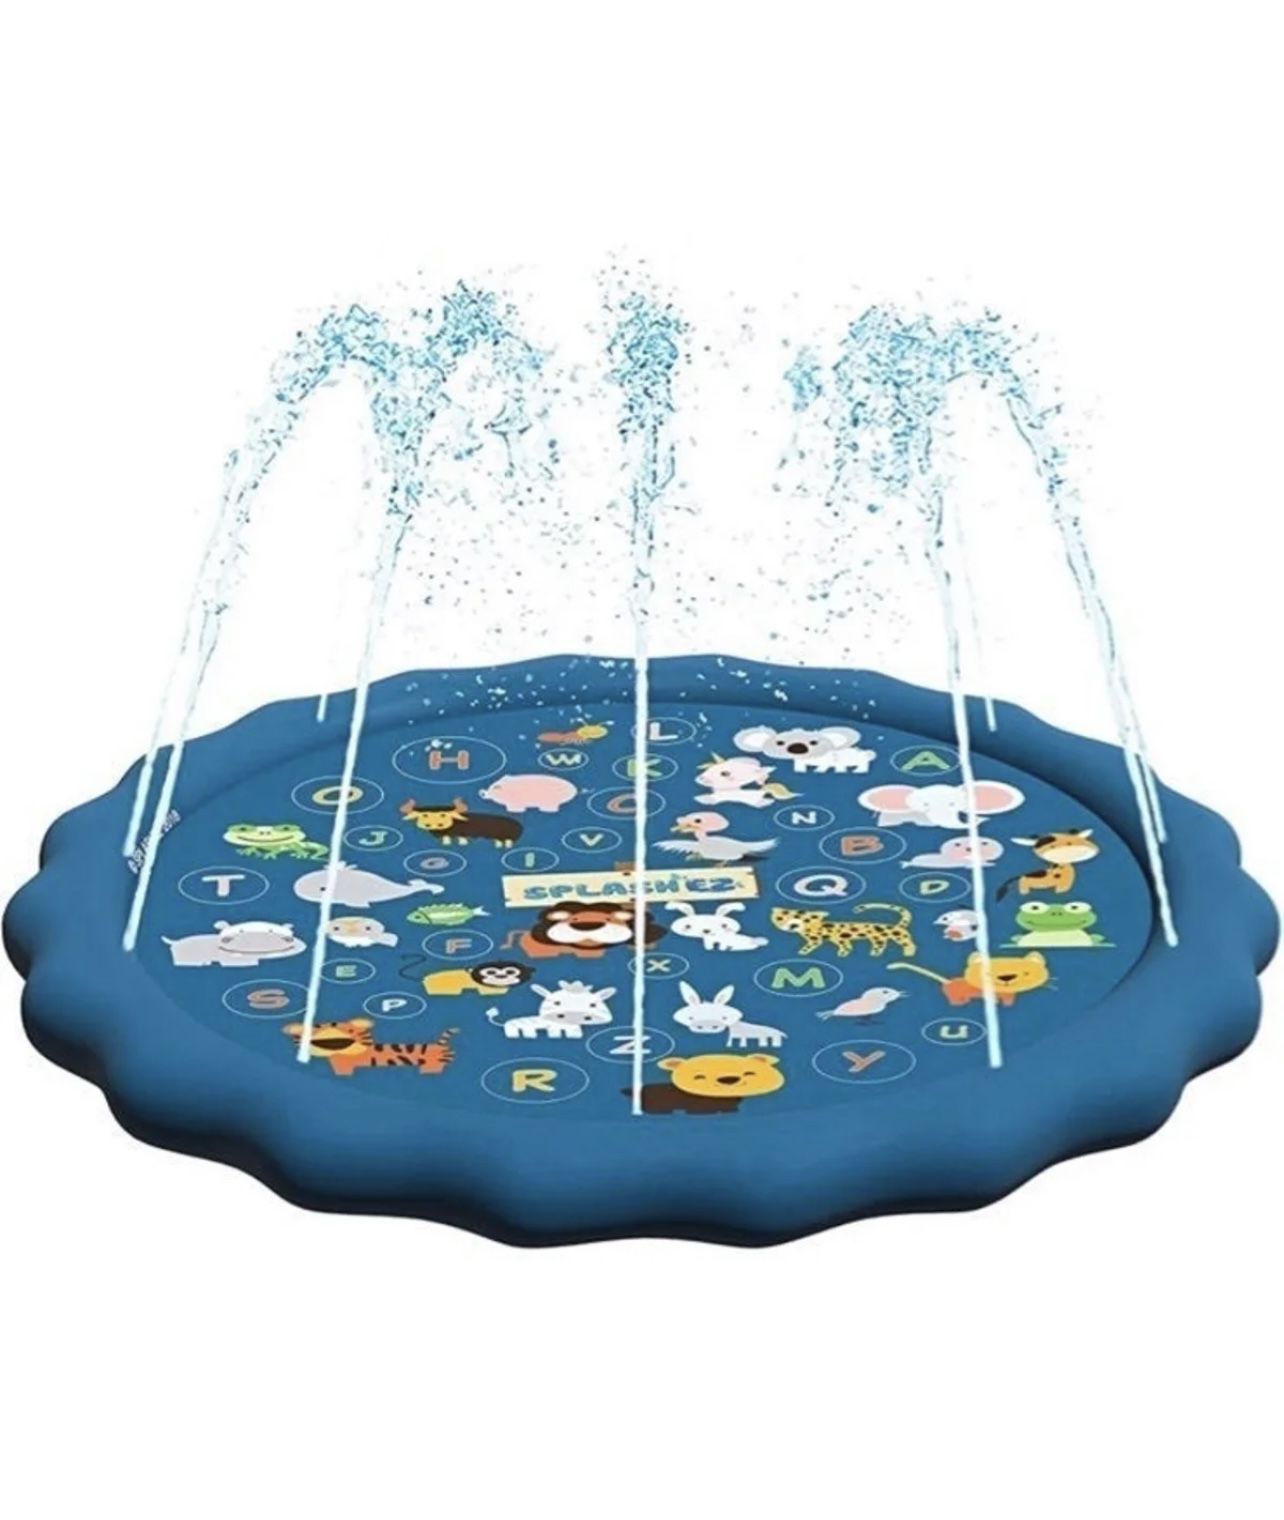 SplashEZ 3-in-1 Splash Pad, Sprinkler for Kids, and Wading Pool for Learning – Children’s Sprinkler Pool, 60’’ Inflatable Water Toys – “from A to Z” O